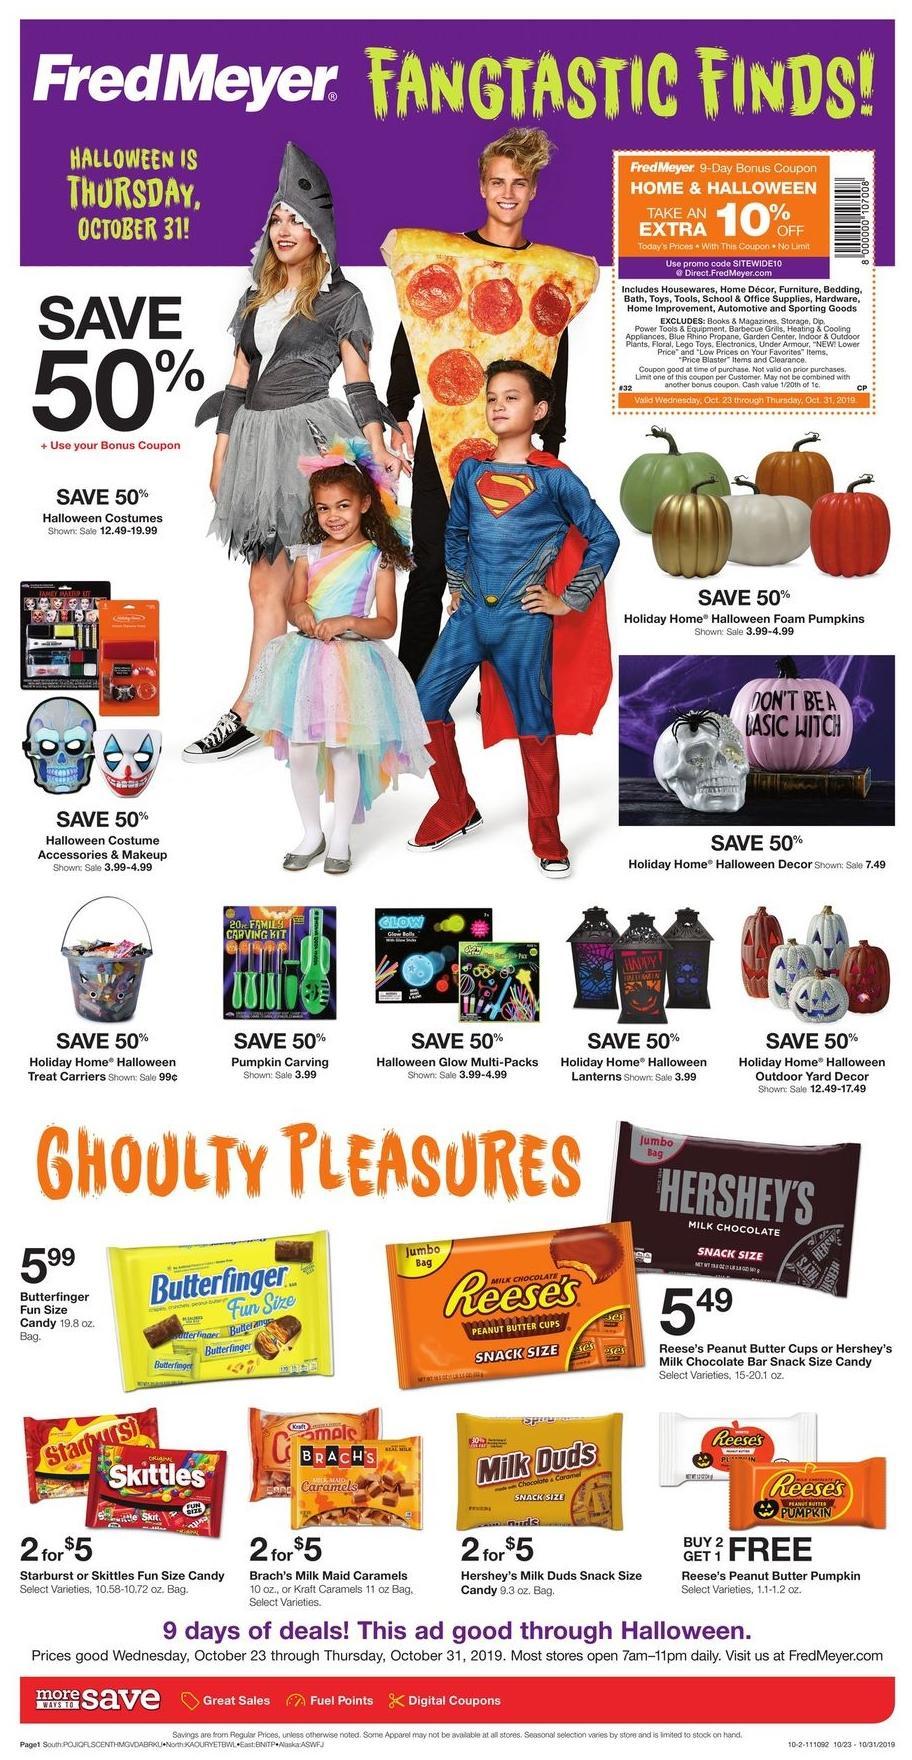 Fred Meyer Halloween Merchandise Weekly Ad from October 23